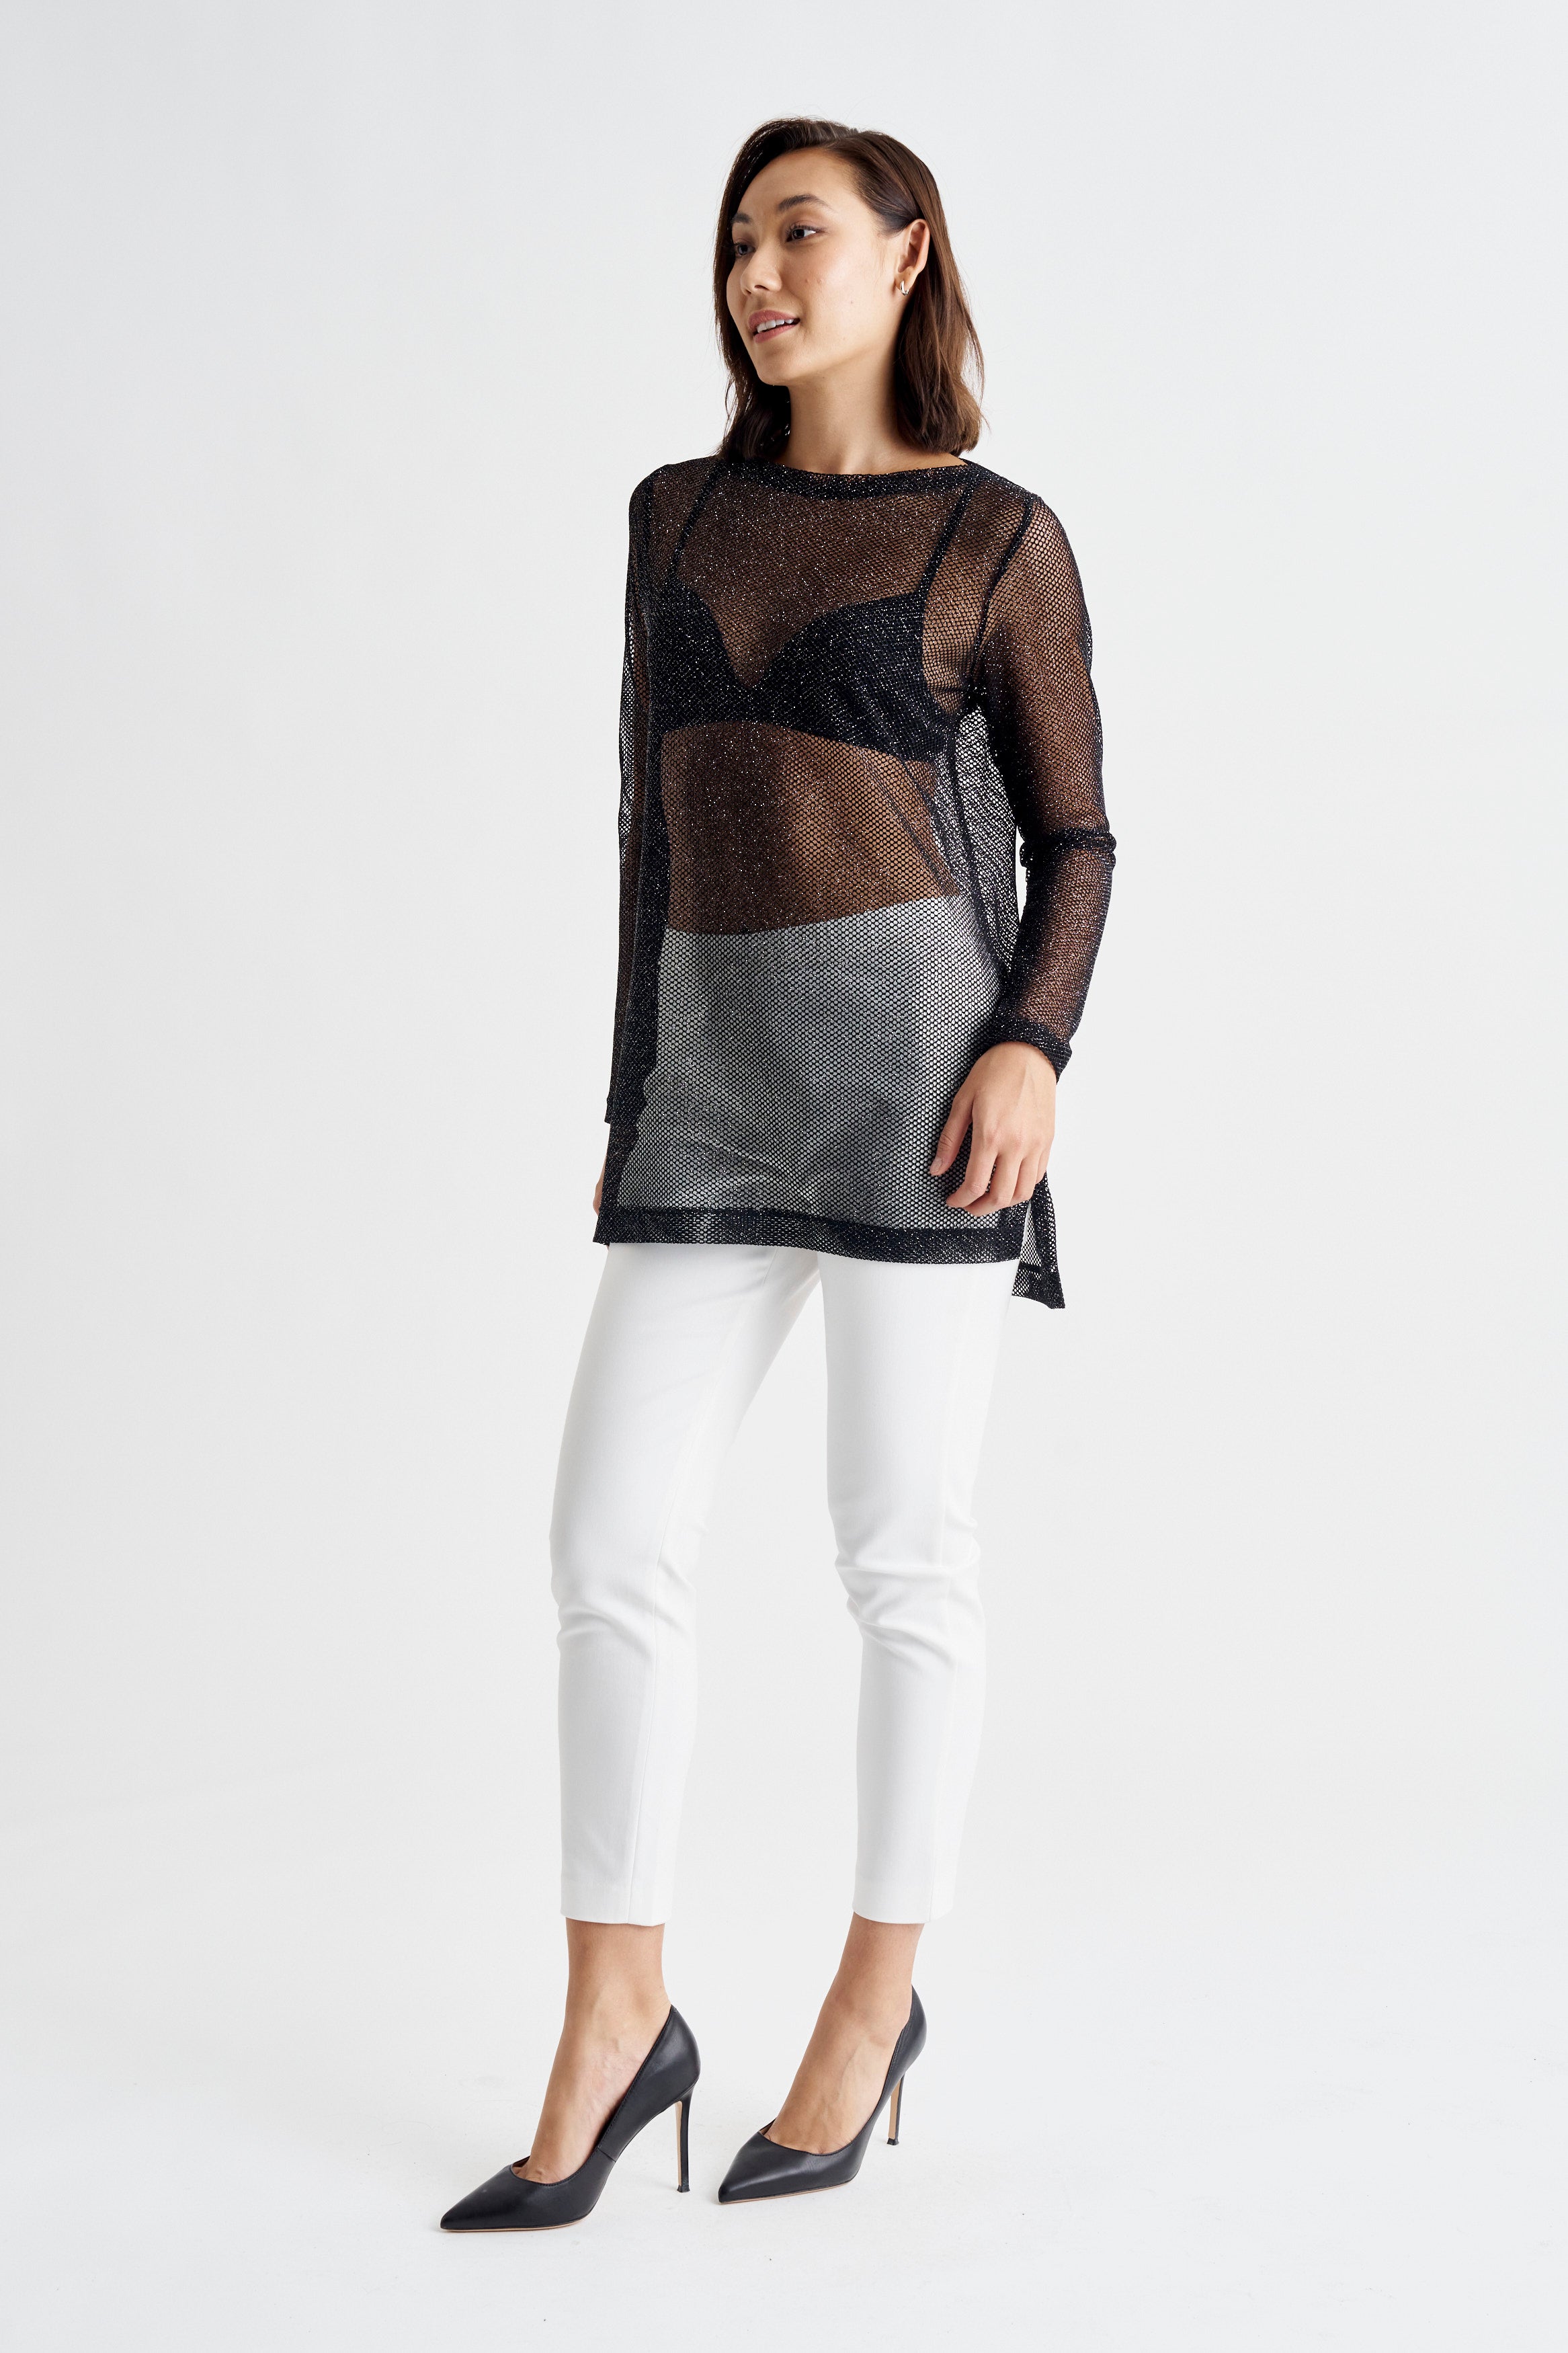 NIGHT FEVER TOP